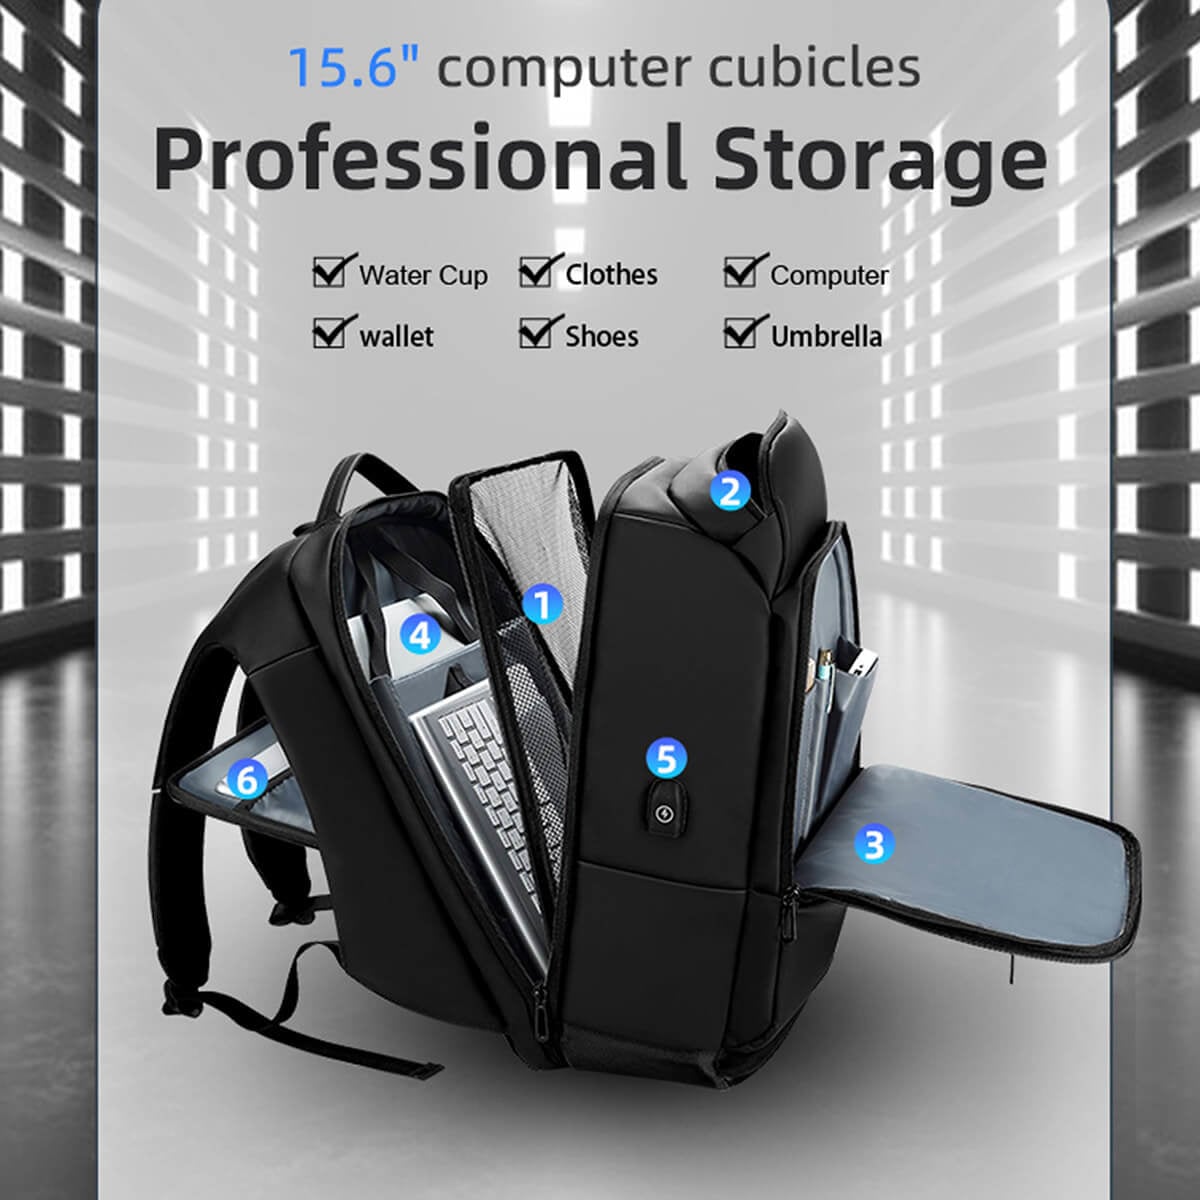 Multi-layer storage system in large laptop backpack